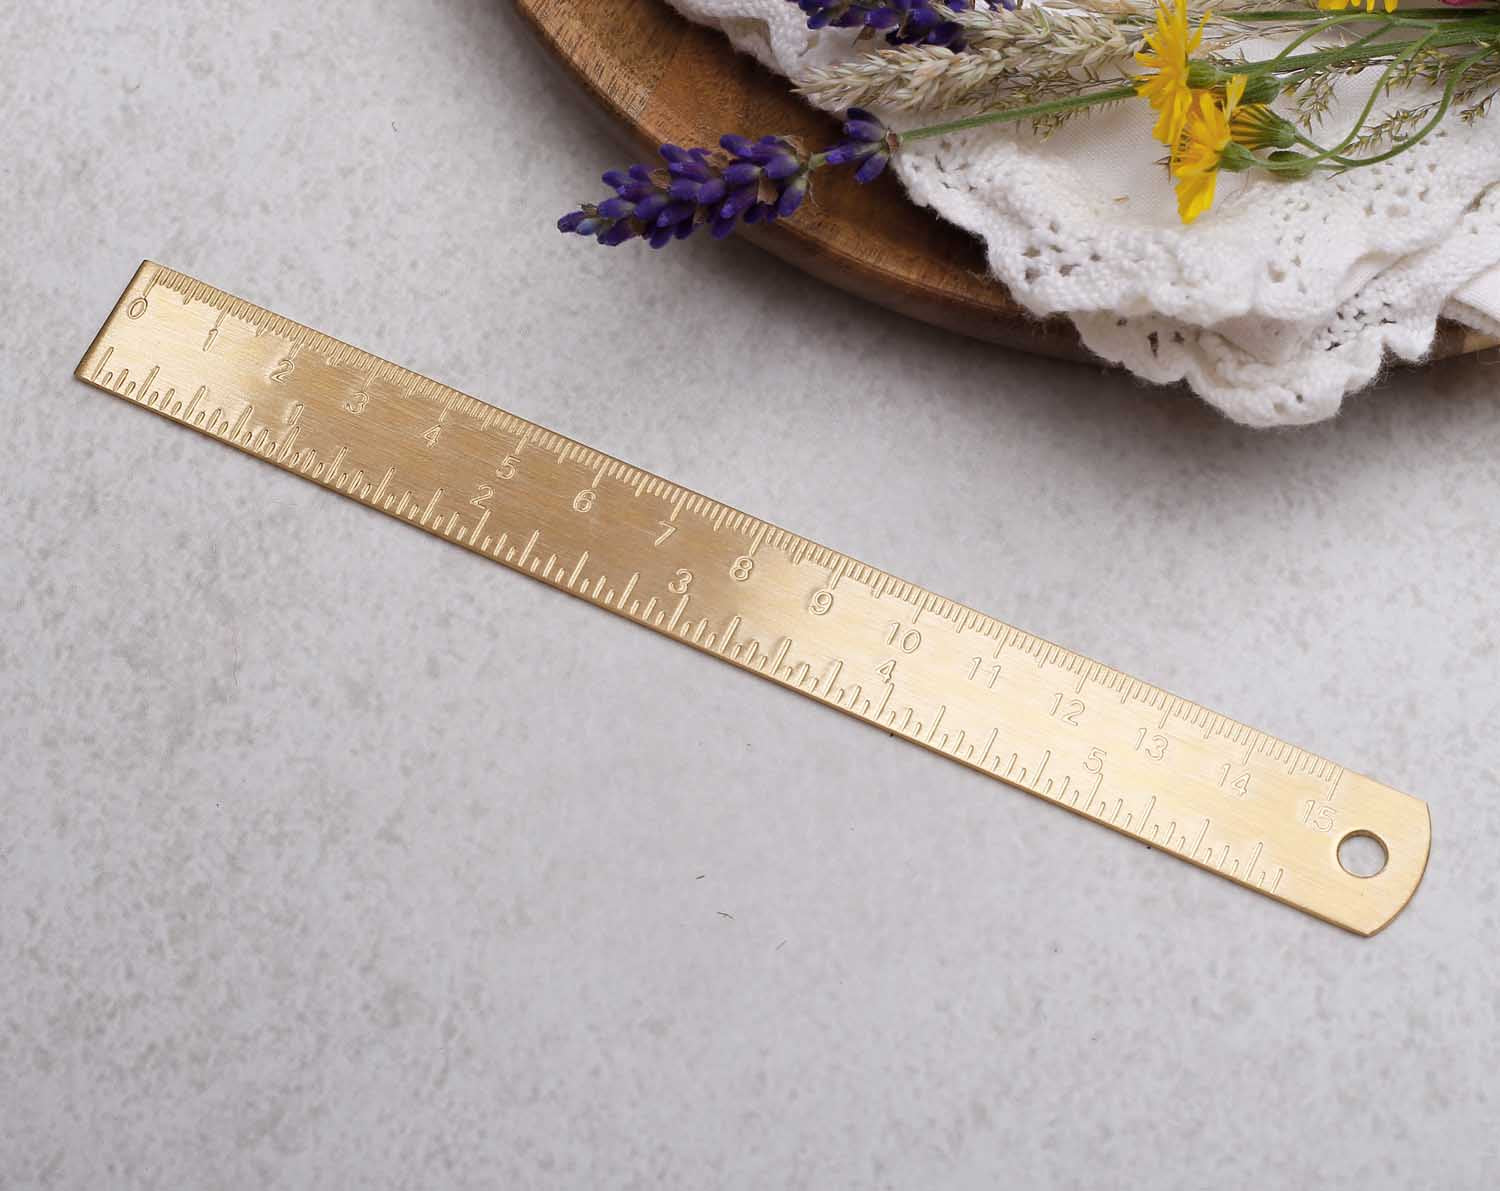 Gold Metal Ruler With Tassels